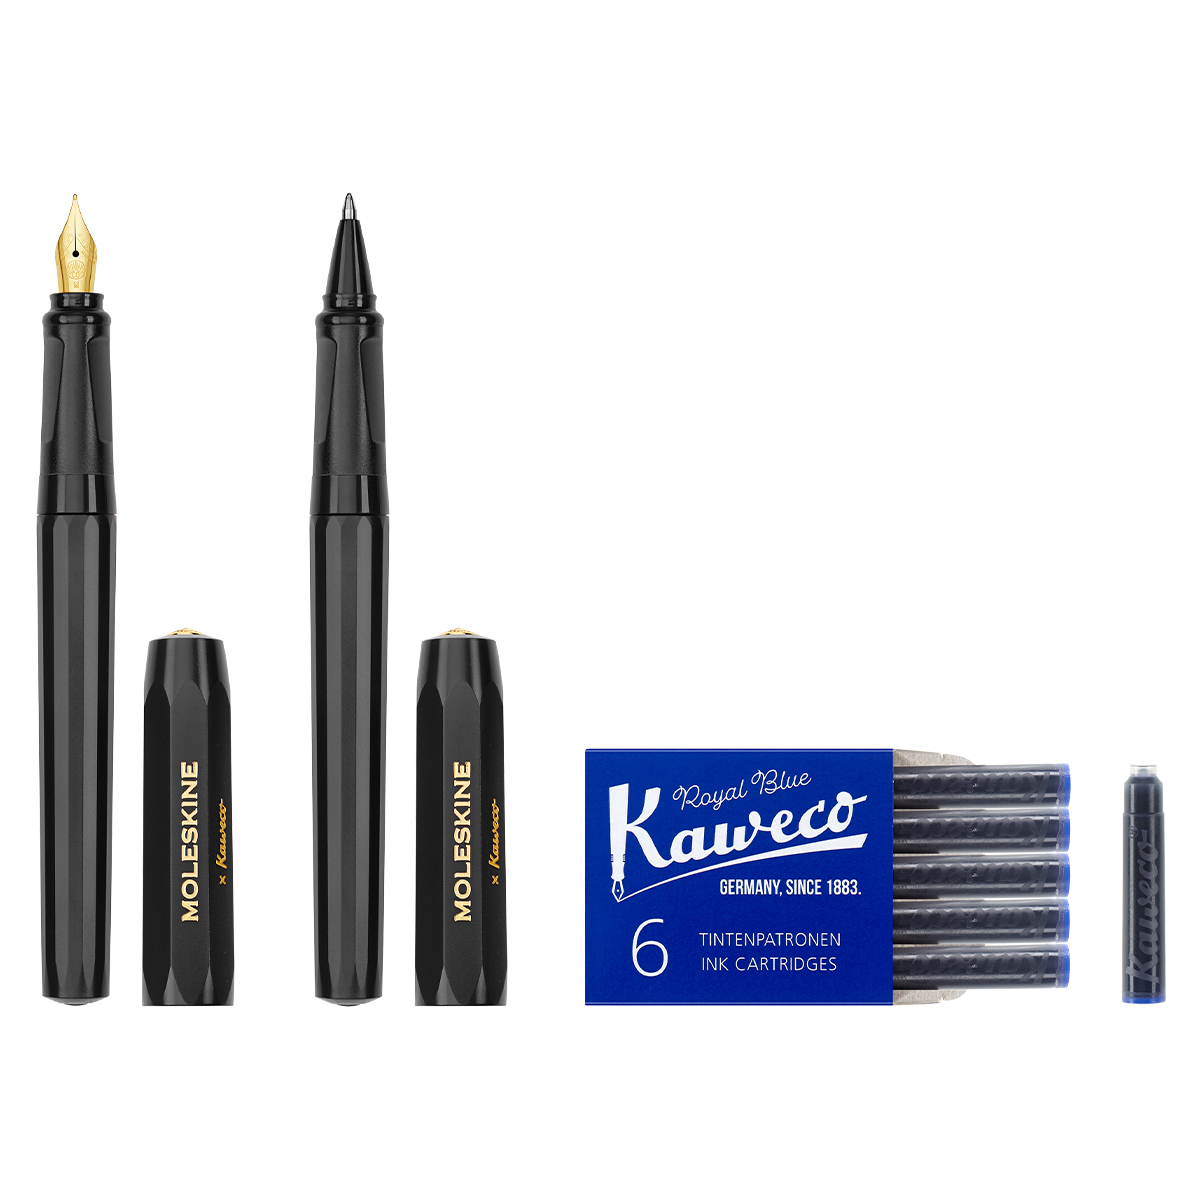 Kaweco x Moleskine Set Black in the group Pens / Fine Writing / Gift Pens at Pen Store (129835)